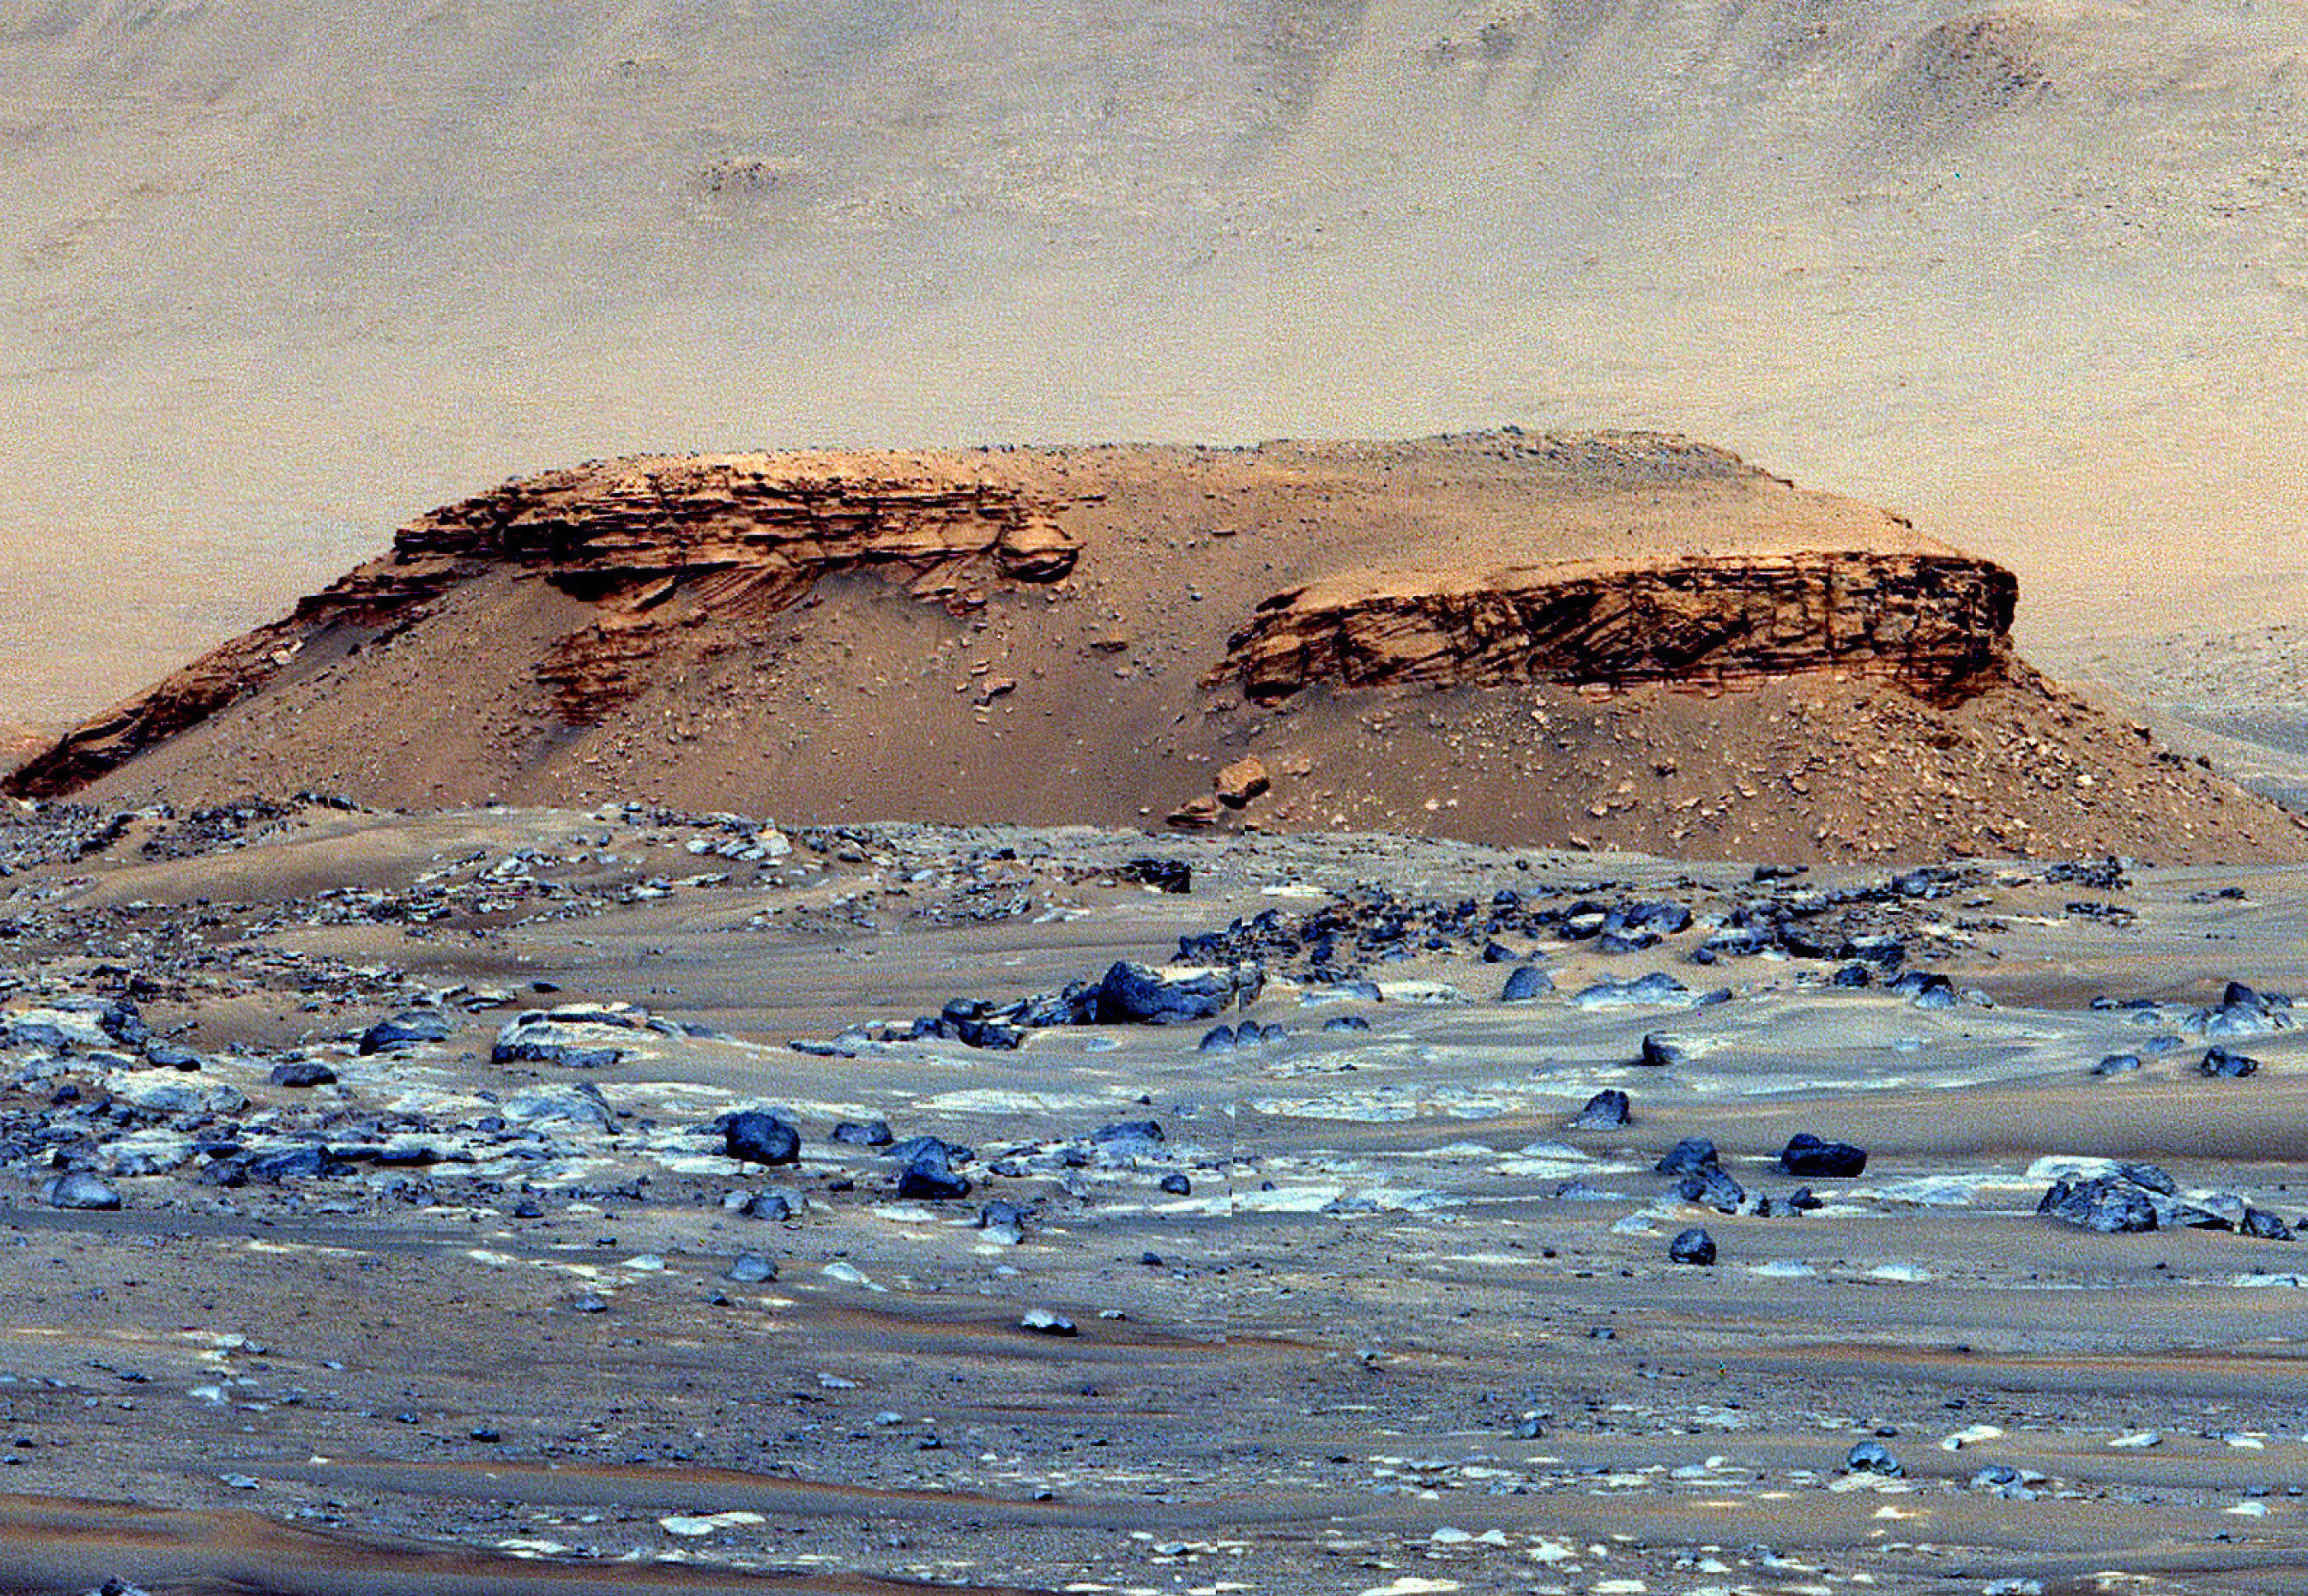 Possible organic compounds found in Mars crater rocks